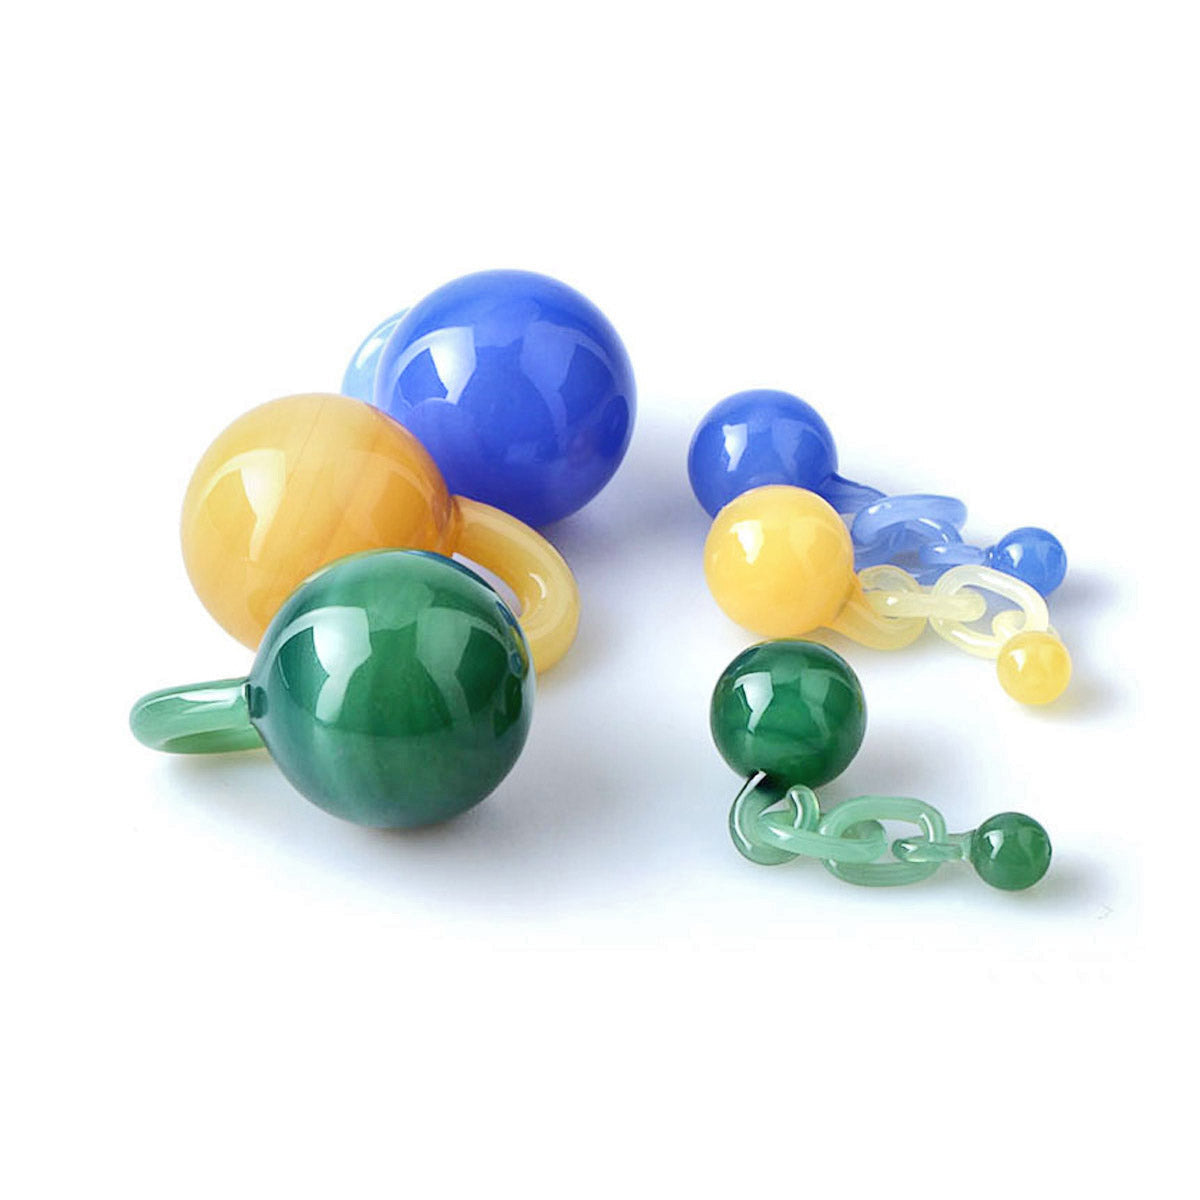 Two Piece Terp Chain Slurper Set in vibrant colors, perfect for dab rigs, front view on white background